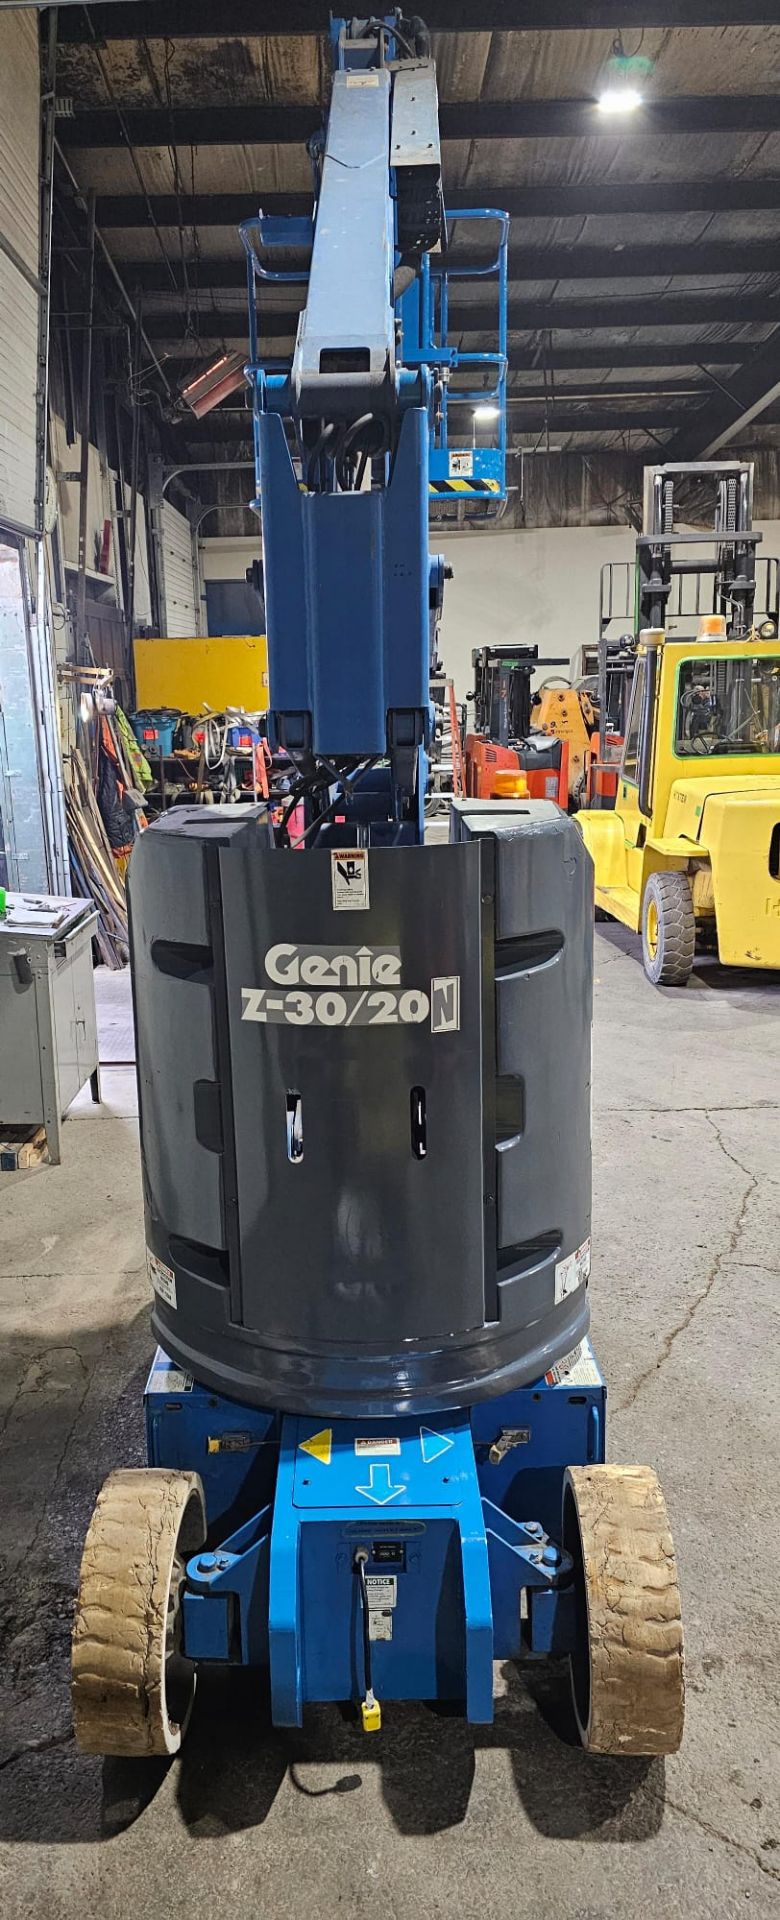 Genie model Z-30/20 Zoom Boom Electric Motorized Man Lift - with 48V Battery with non-marking tires, - Image 6 of 7